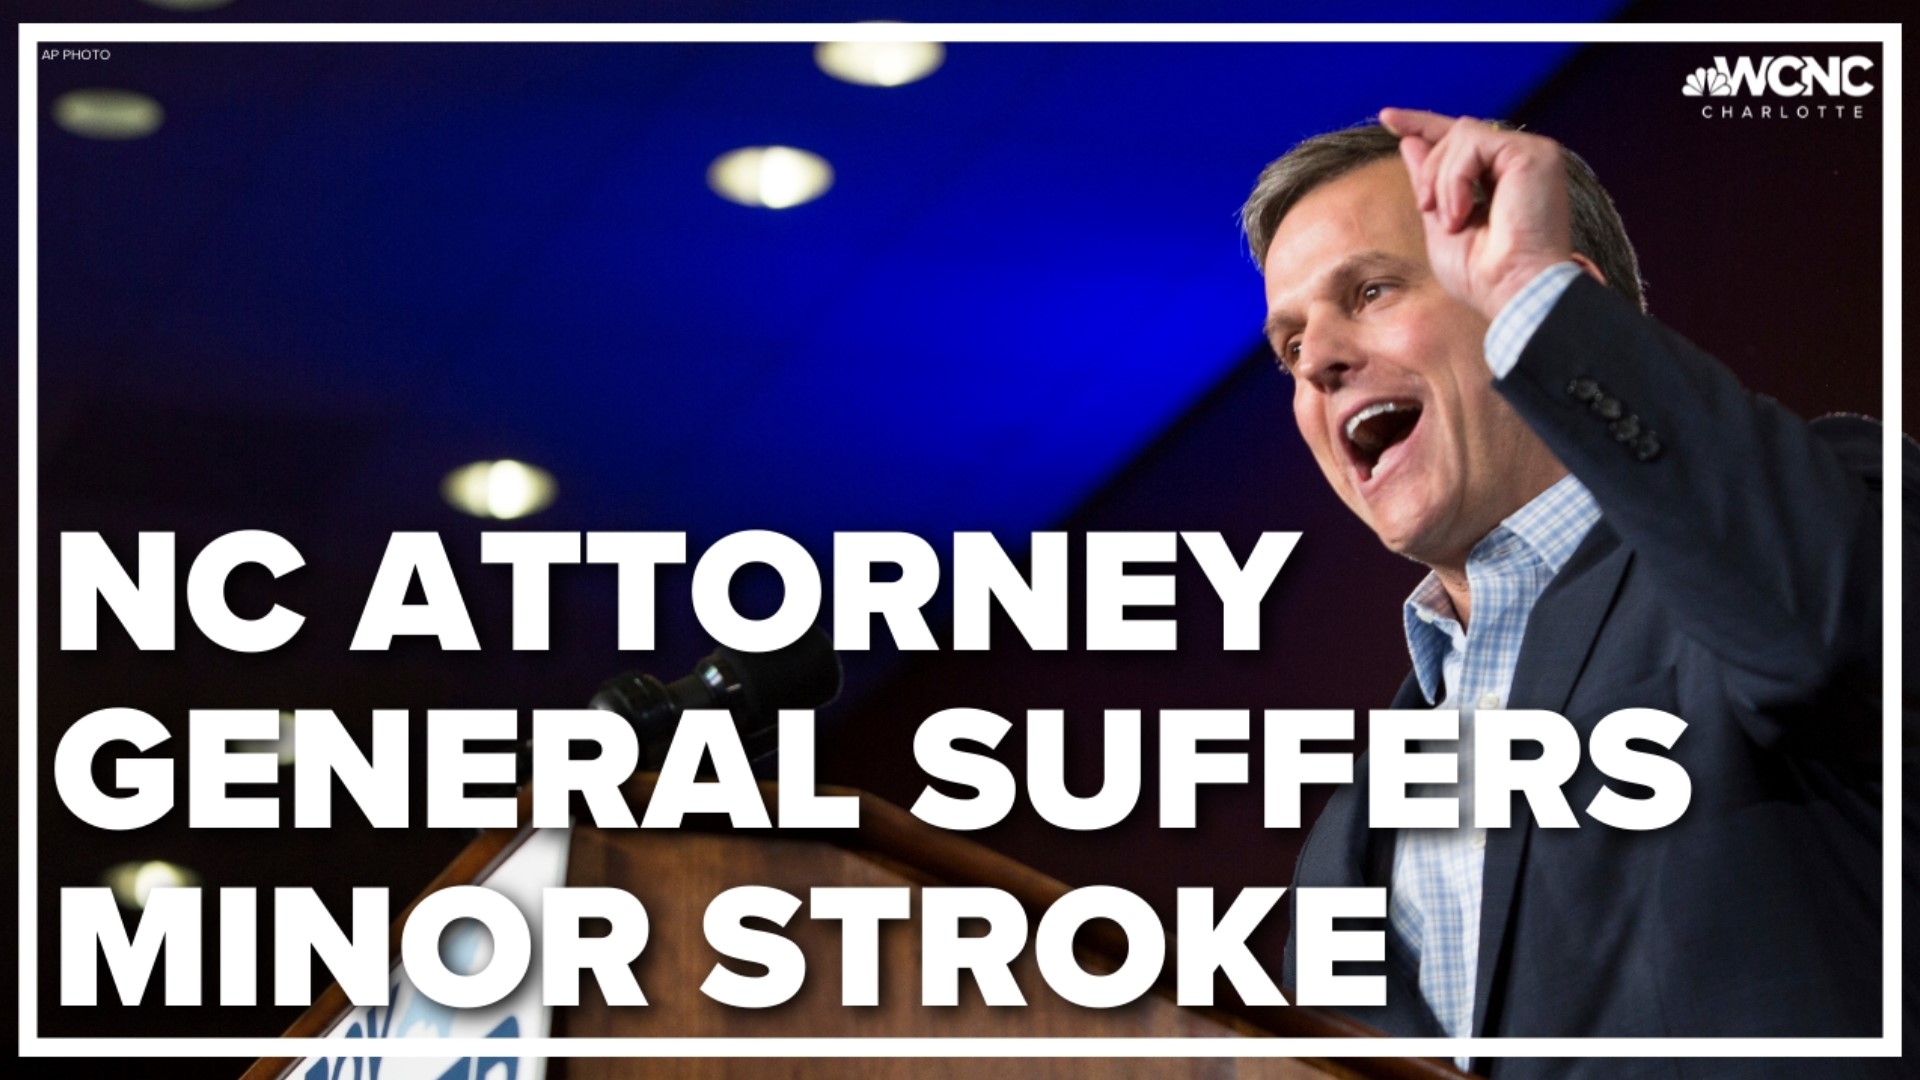 Attorney General Stein is crediting his wife with saving his life because she knew the signs and symptoms of a stroke.